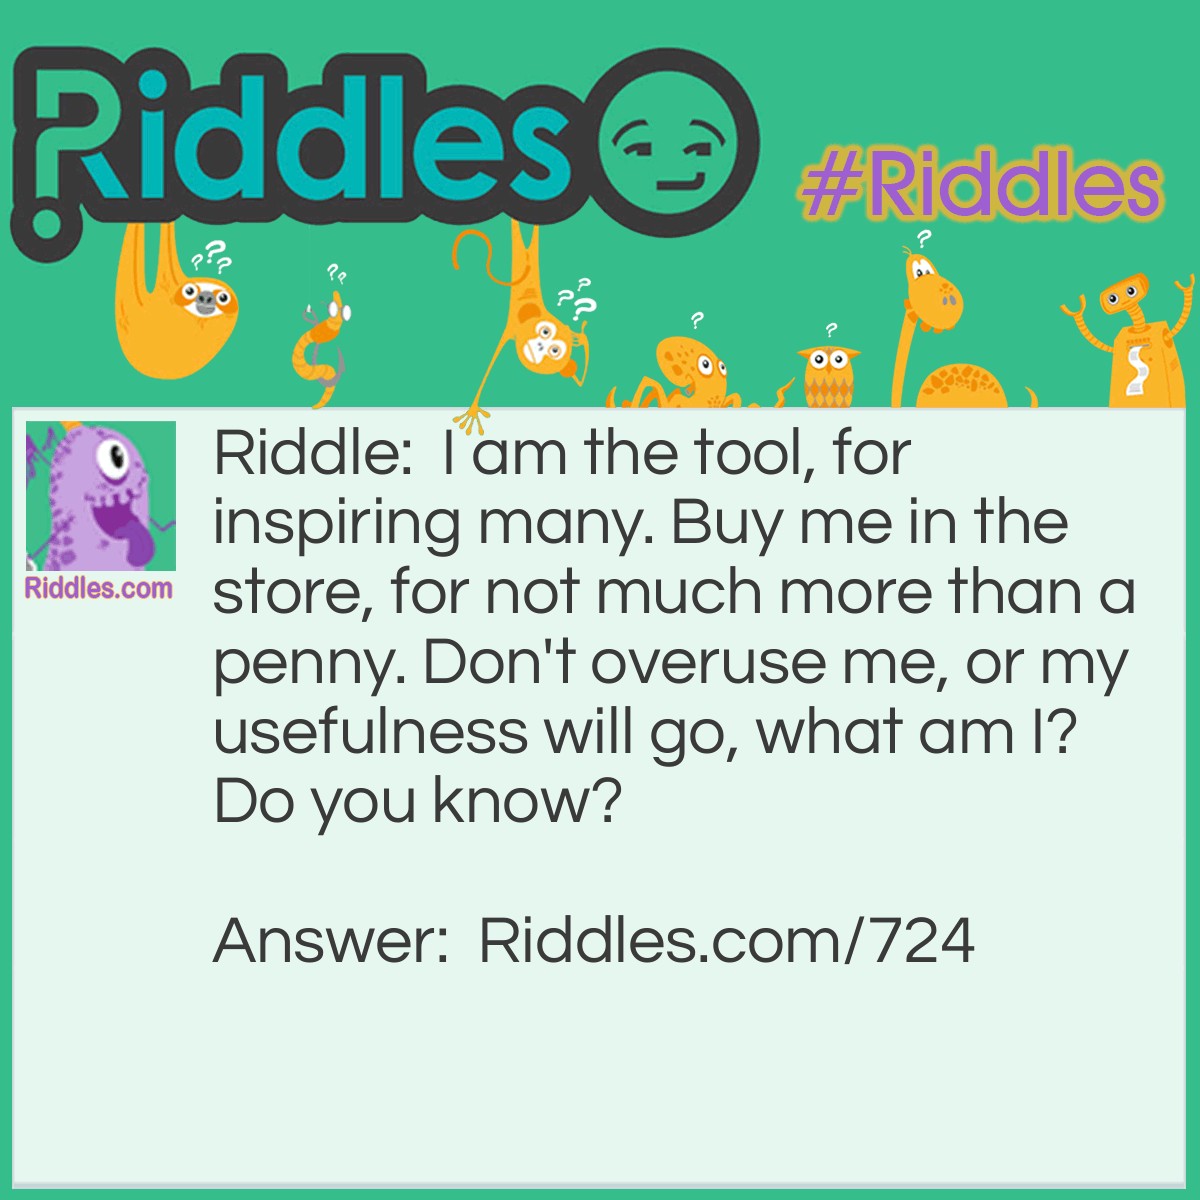 Riddle: I am the tool, for inspiring many. Buy me in the store, for not much more than a penny. Don't overuse me, or my usefulness will go, what am I? Do you know? Answer: An inkpen.